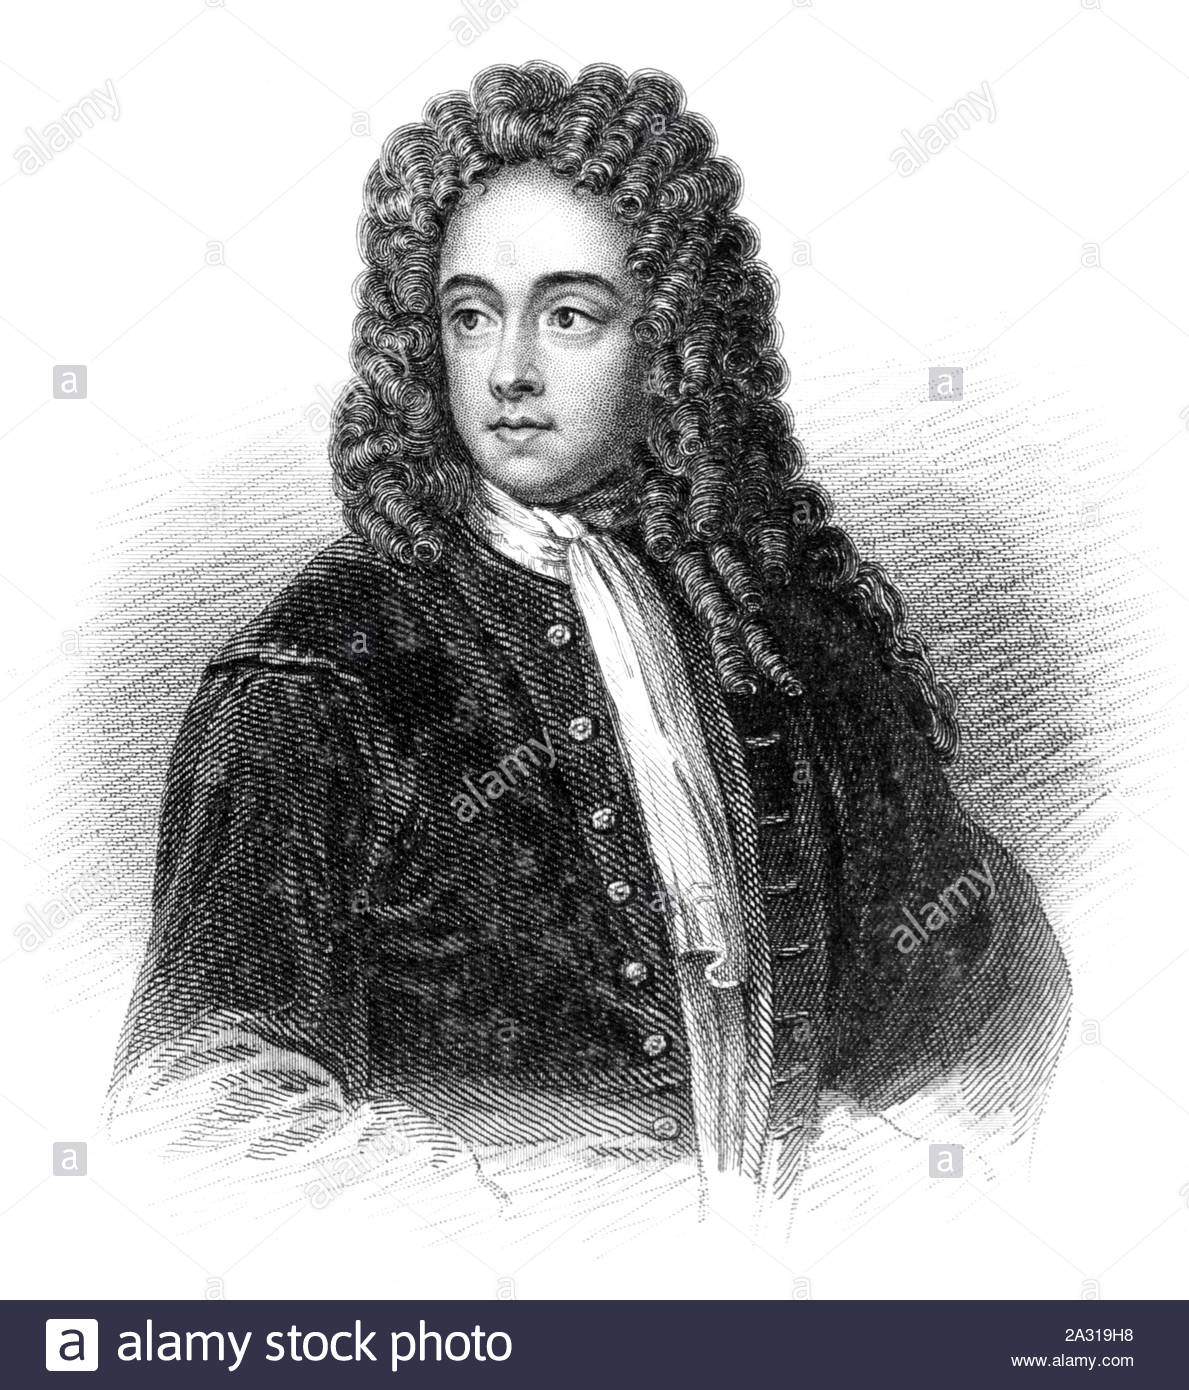 Charles Talbot portrait, 1st Duke of Shrewsbury, 1660 – 1718, was an English politician who was part of the Immortal Seven group that invited William III, Prince of Orange, to depose James II of England as monarch during the Glorious Revolution, vintage illustration from 1850 Stock Photo